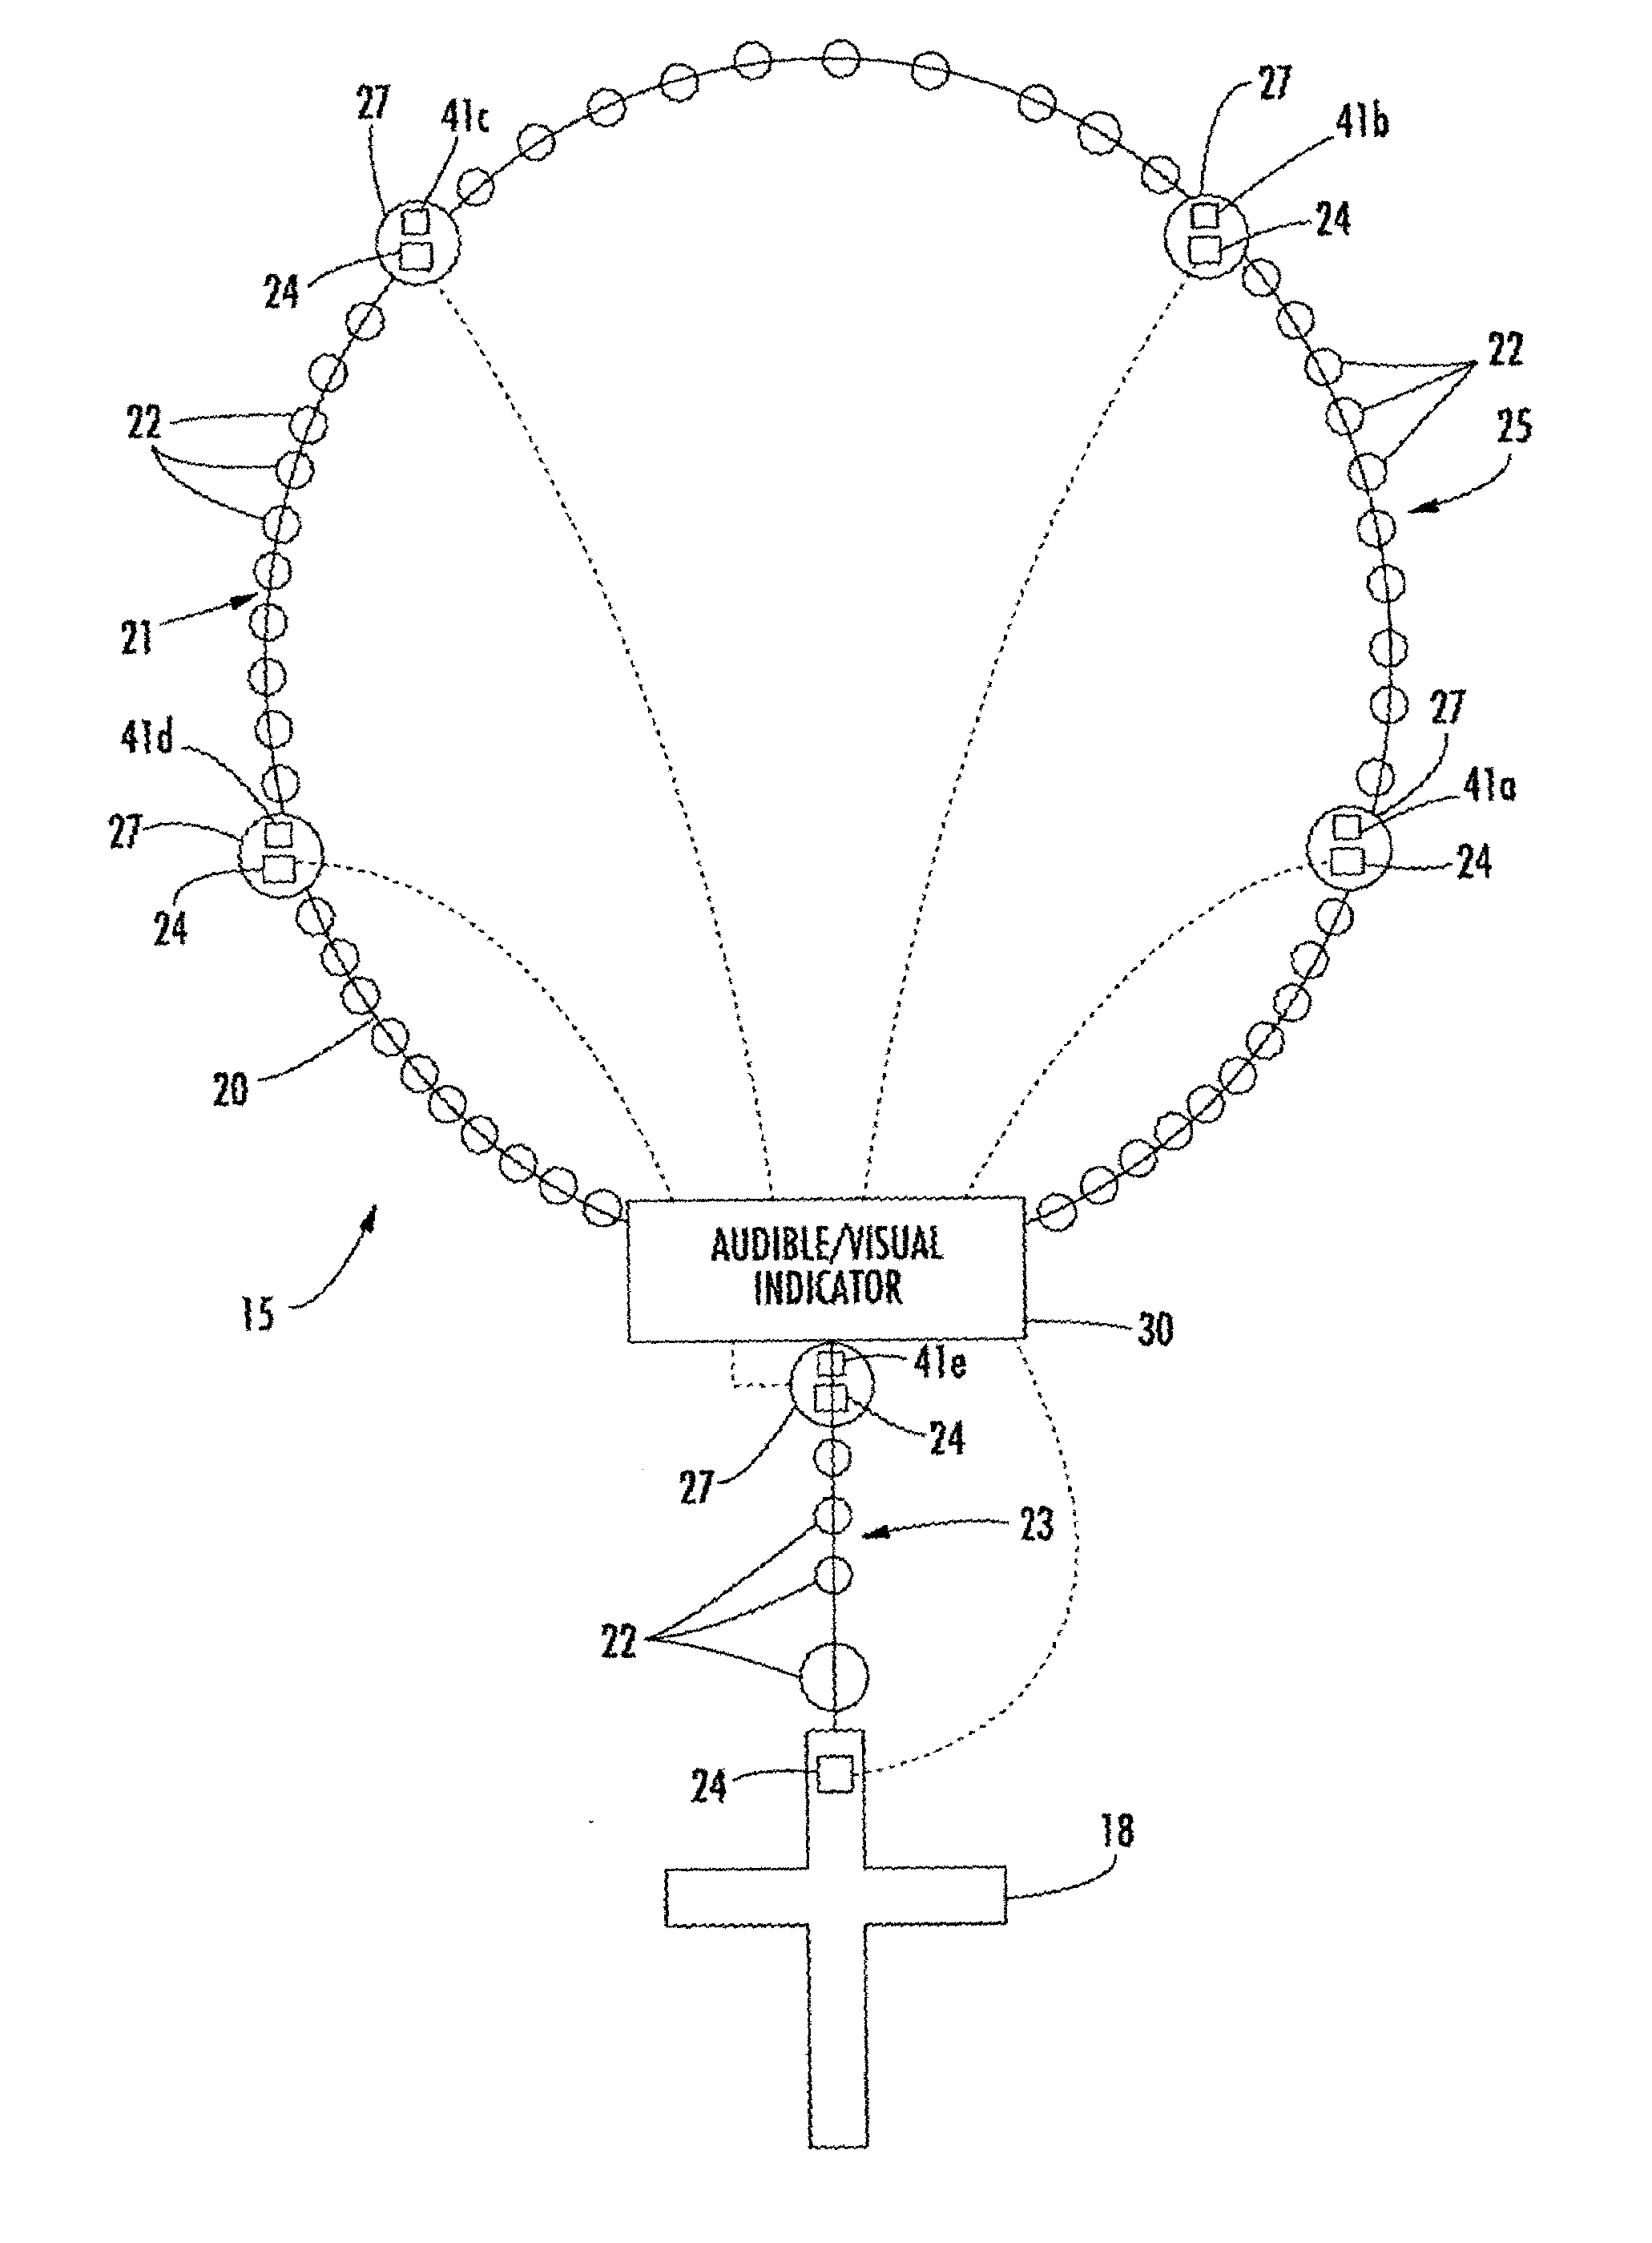 Rosary having audible and/or visual indicators and related methods